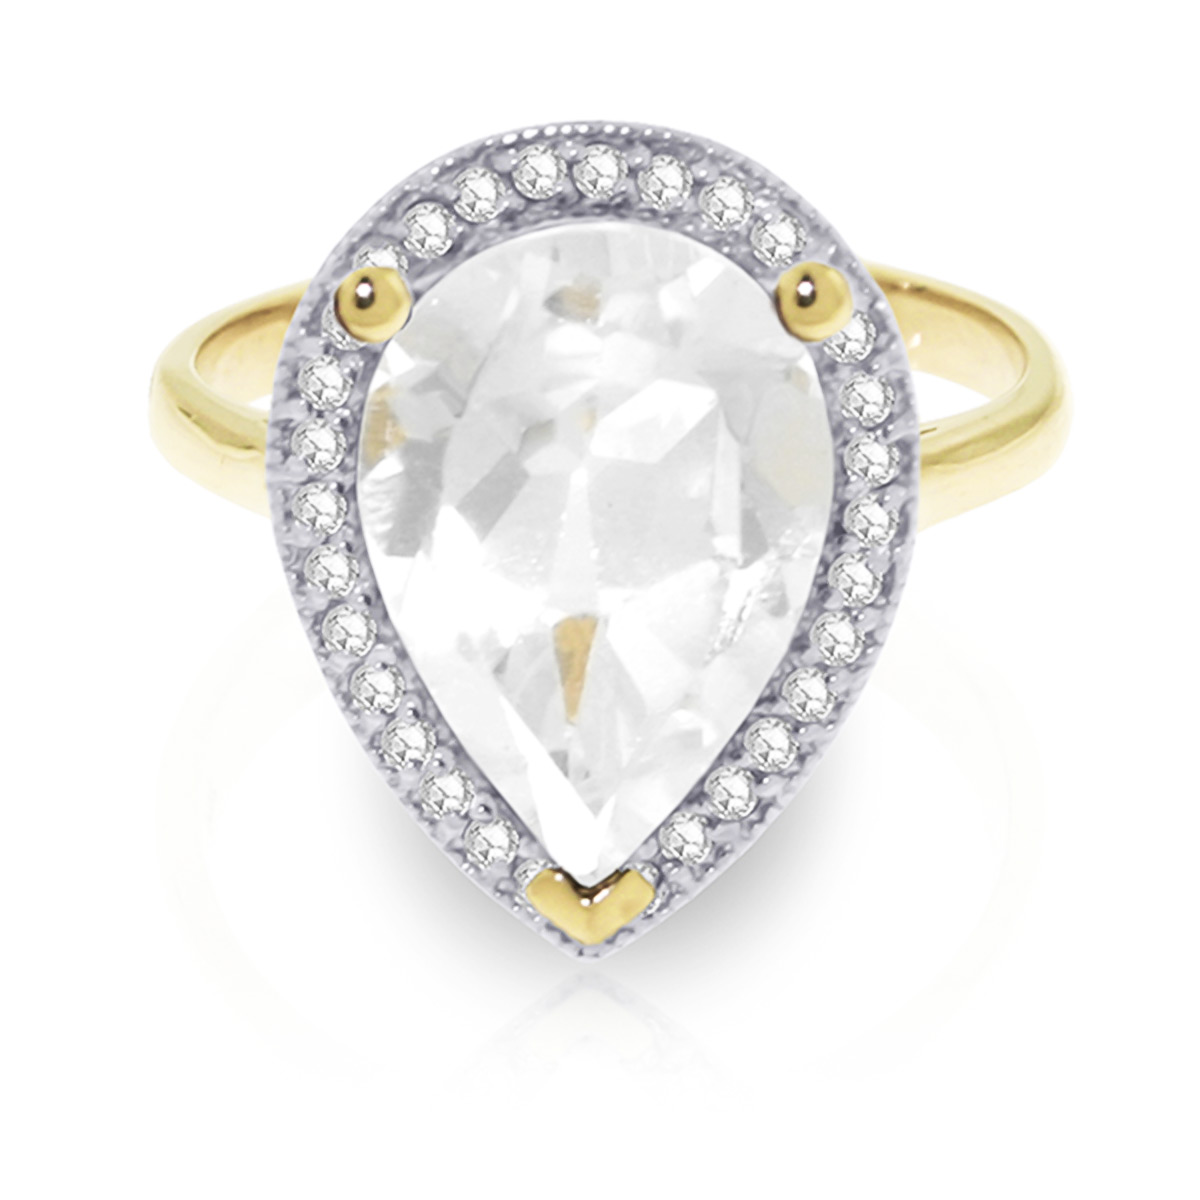 White Topaz Halo Ring 5.61 ctw in 9ct Gold